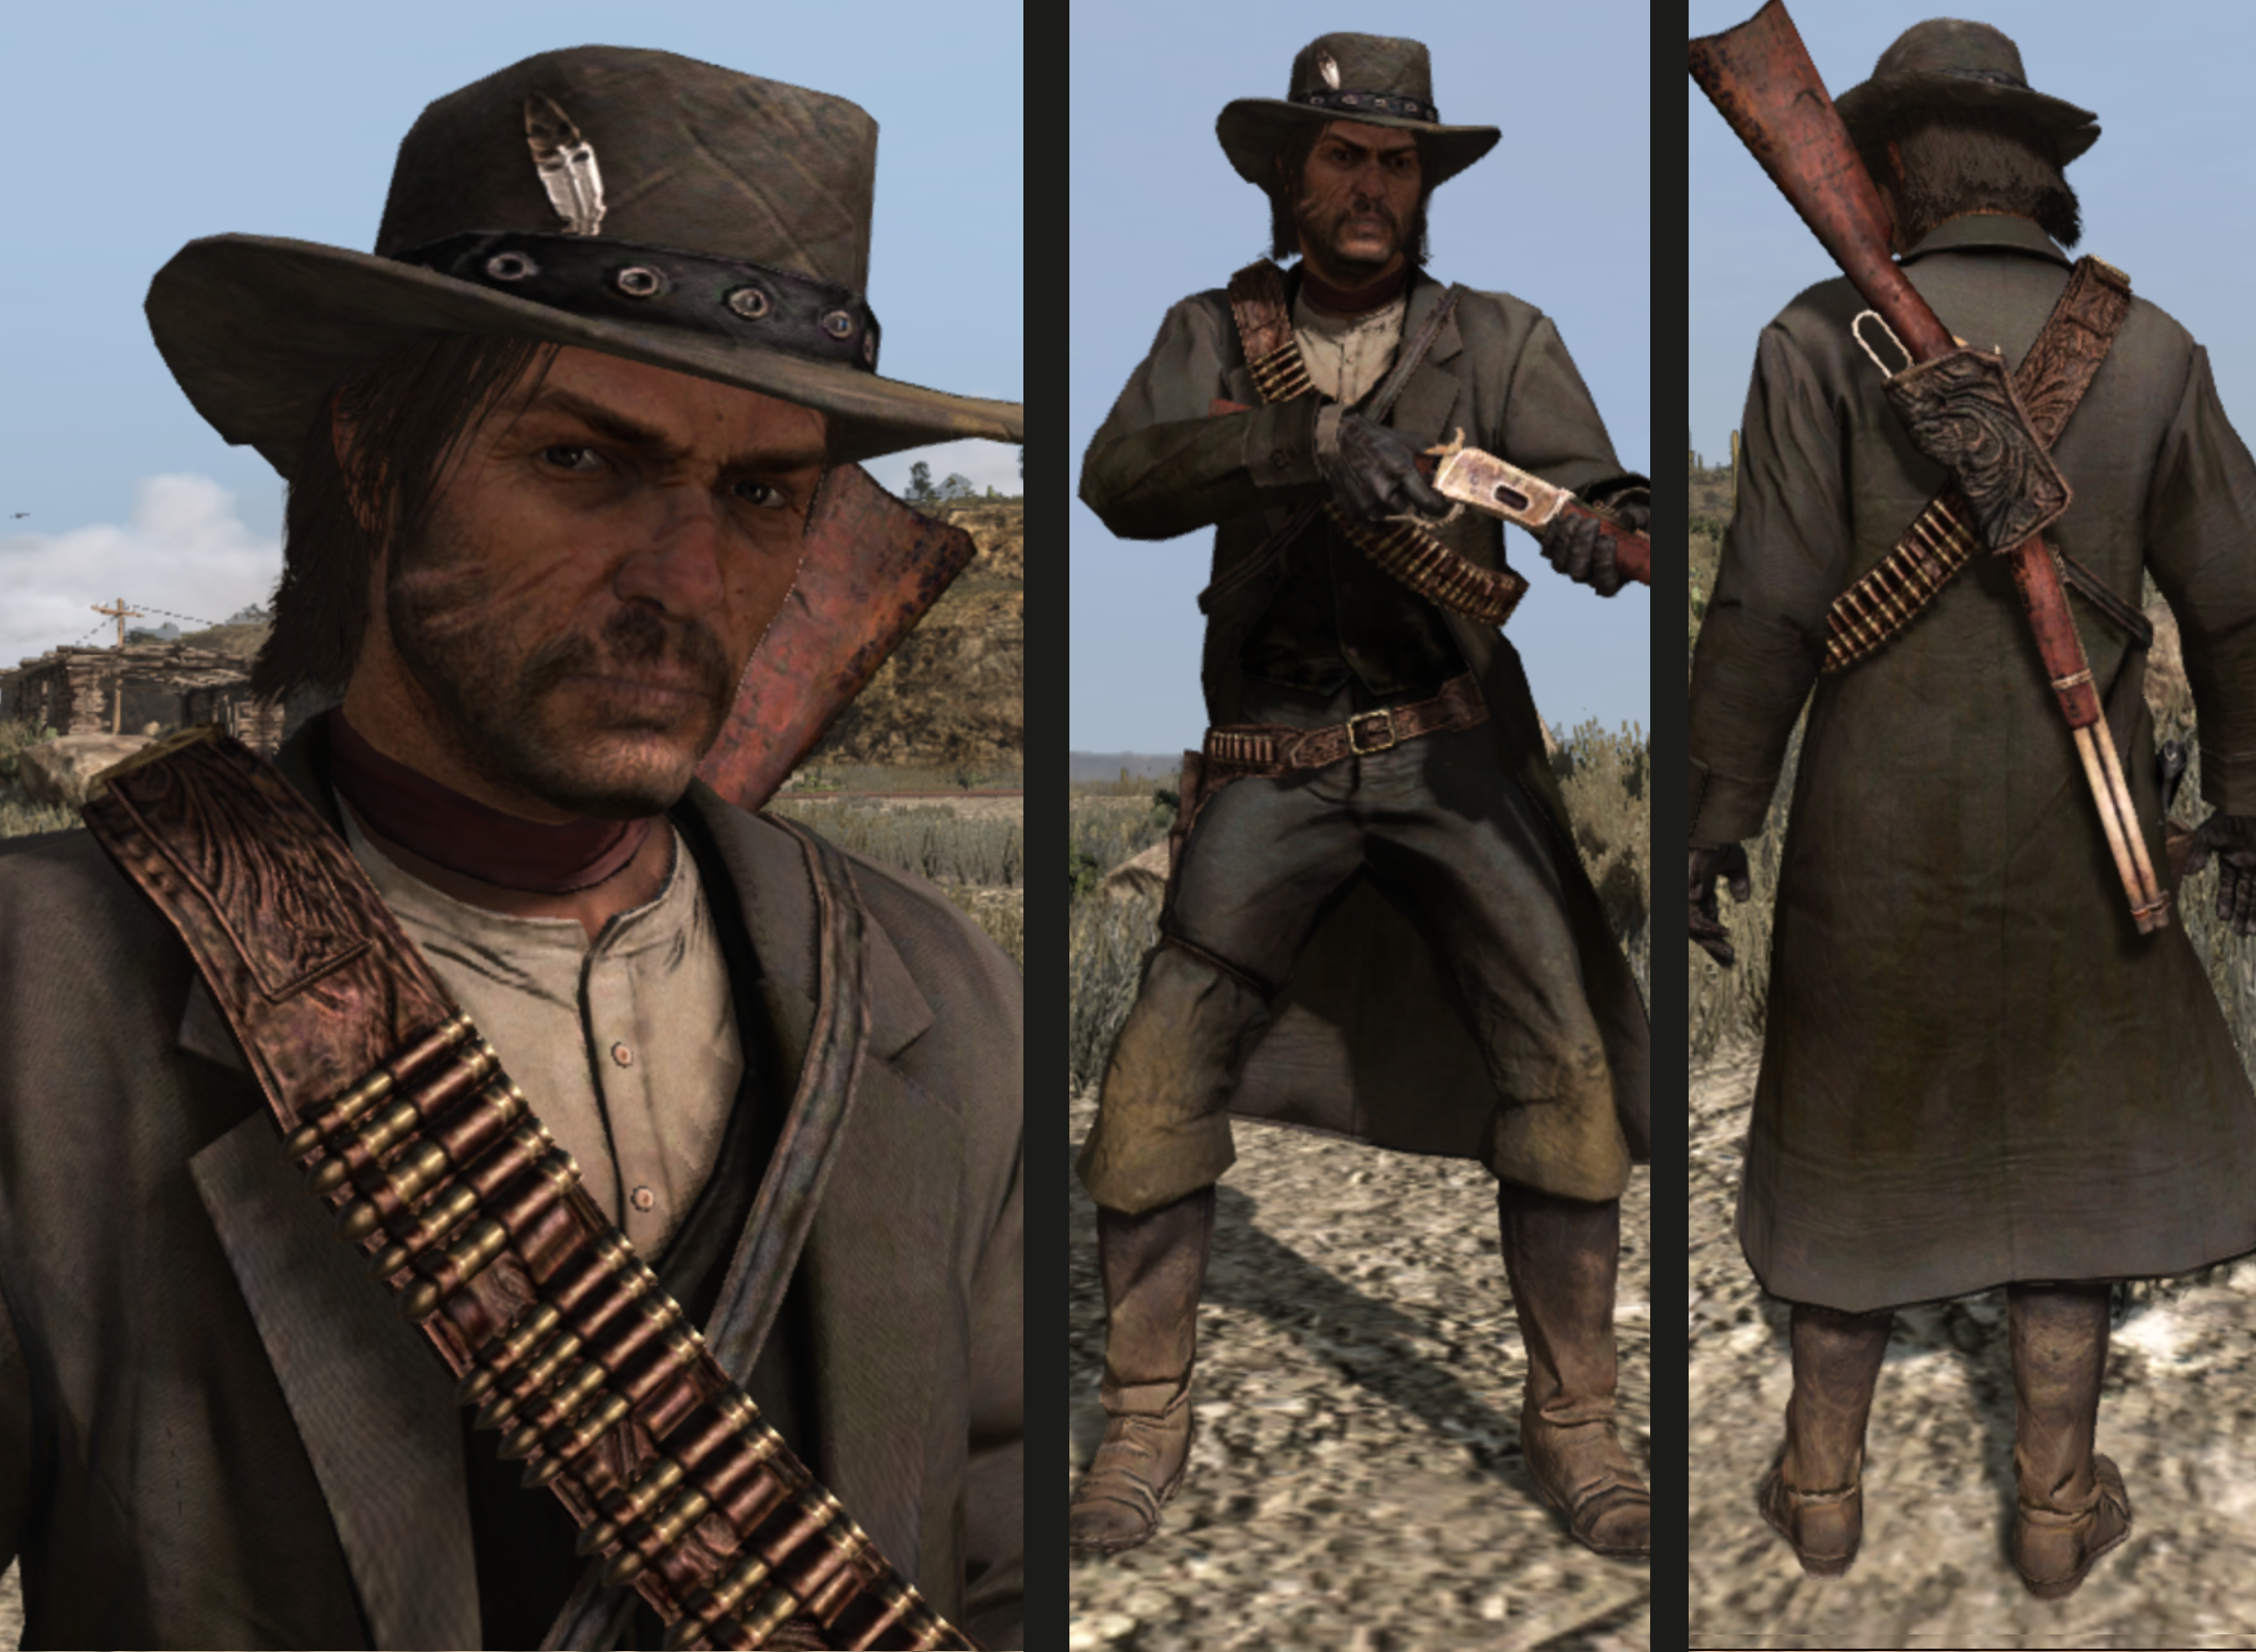 Arriba 47+ imagen john marston legend of the west outfit